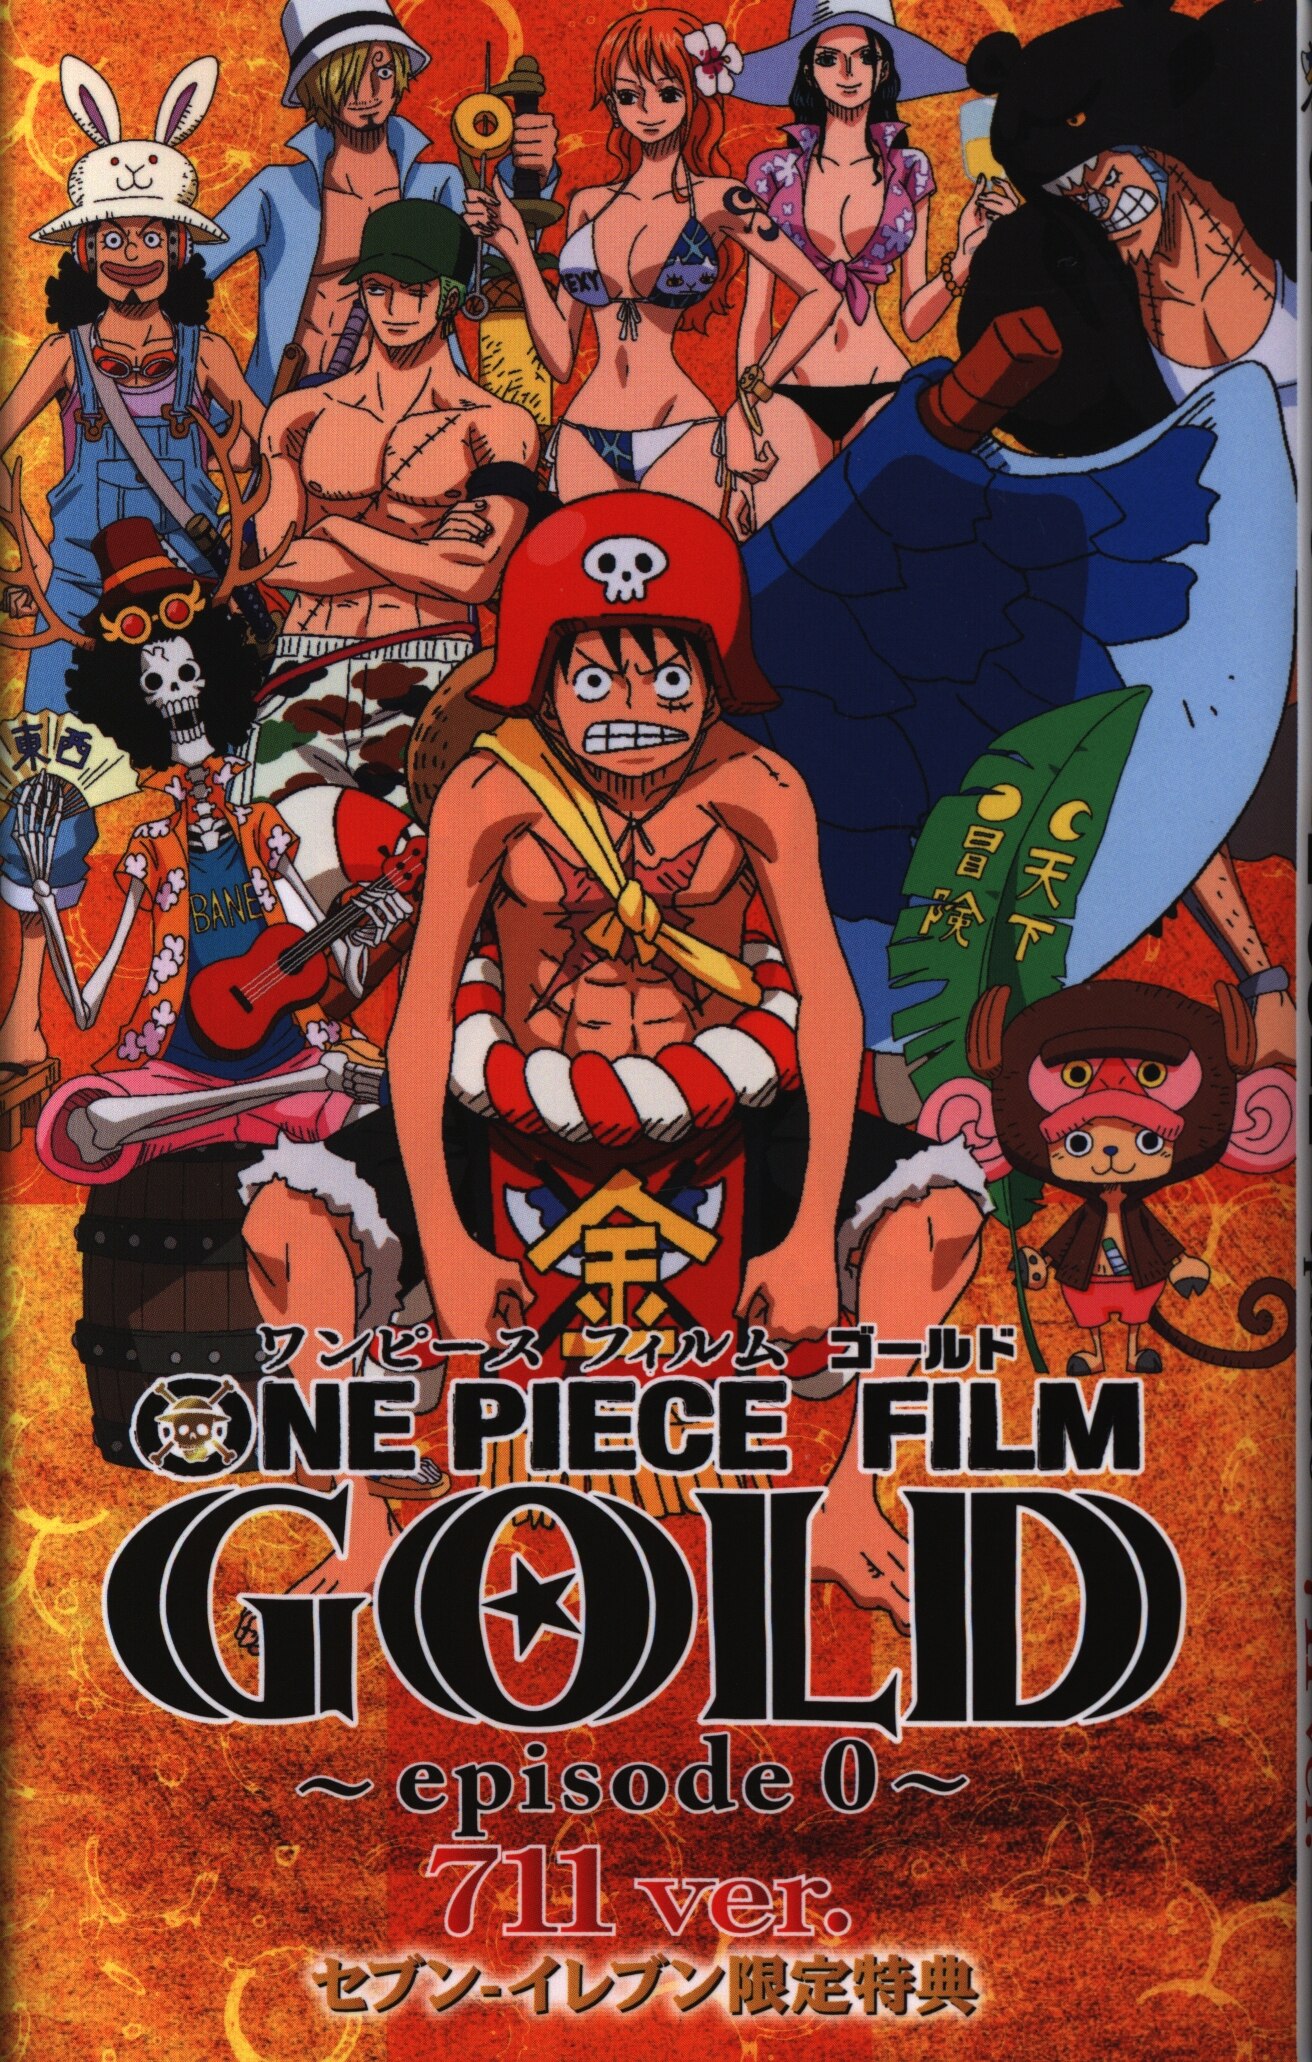 ONE PIECE FILM GOLD Episode 0 LIMITED BOOK 711 ver Japanese Anime Manga Art